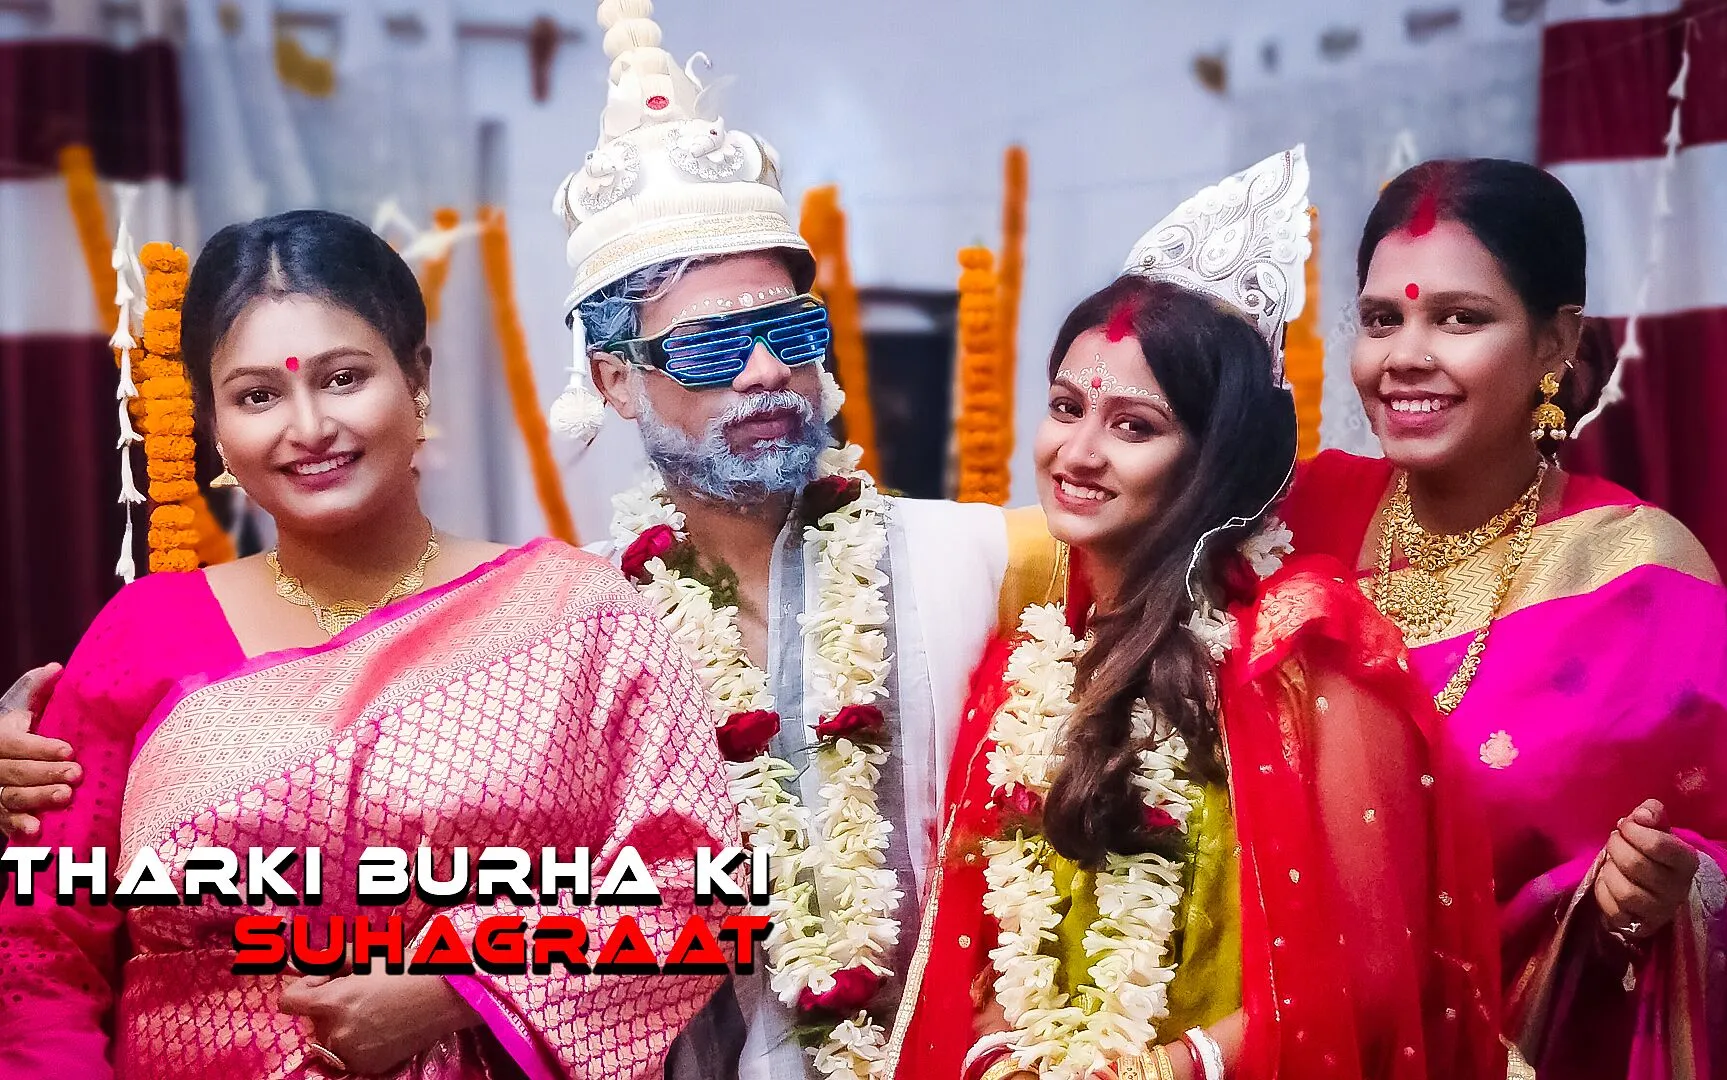 Crazy old man turns out to celebrate honeymoon with his three newly wed wives by Cine Flix Media Faphouse image